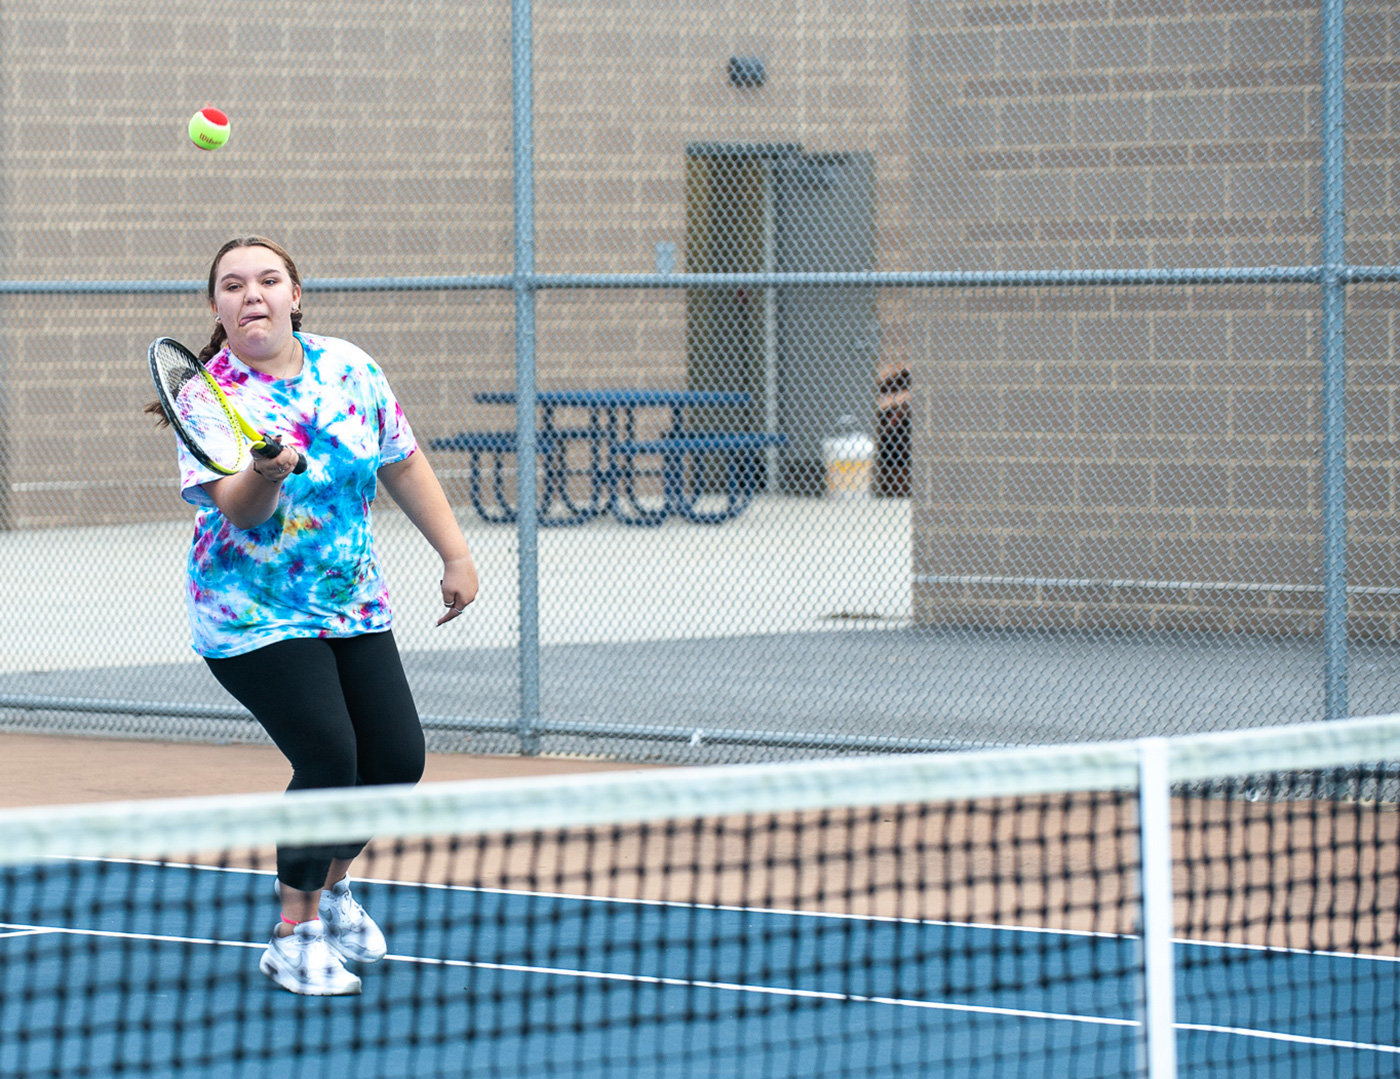 Three schools competed in unified tennis practices at Severna Park High School during the fall.